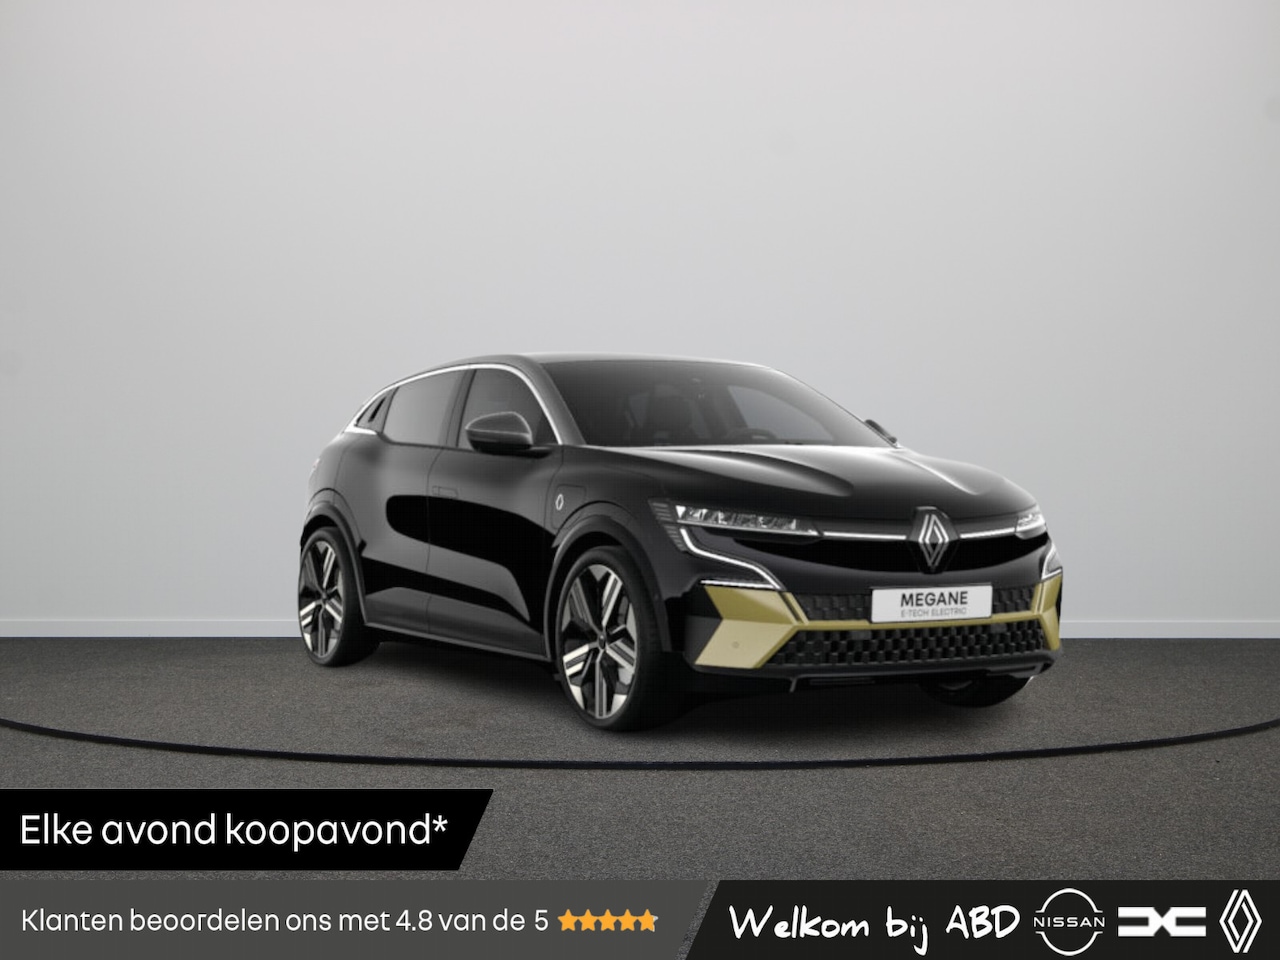 https://cdn.autowereld.nl/I625419108/1280x0/renault-megane-e-tech-ev60-optimum-charge-220-1at-iconic-automatisch-pack-augmented-vision-advanced-driving.jpg